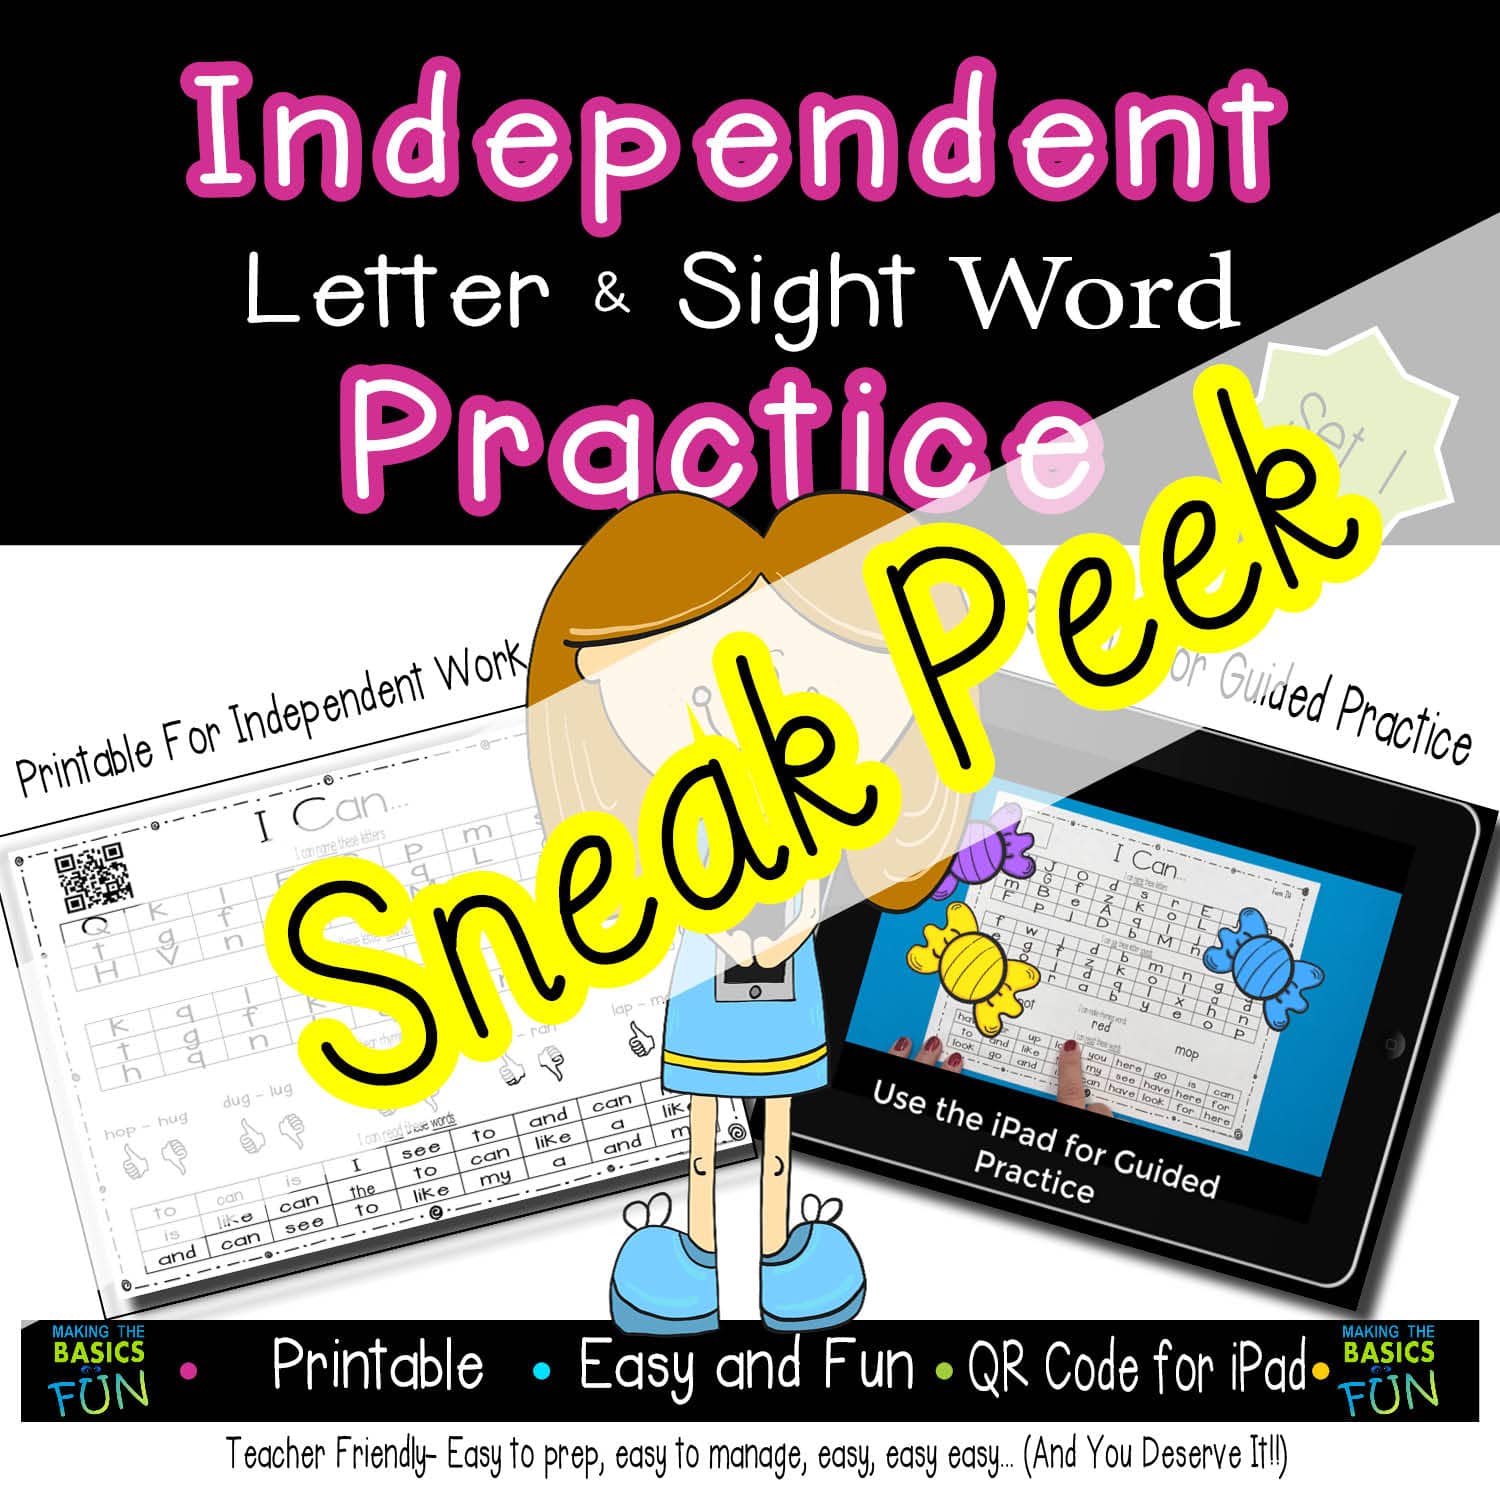 Sneak Peek of Independent Letter and Sight Word Practice